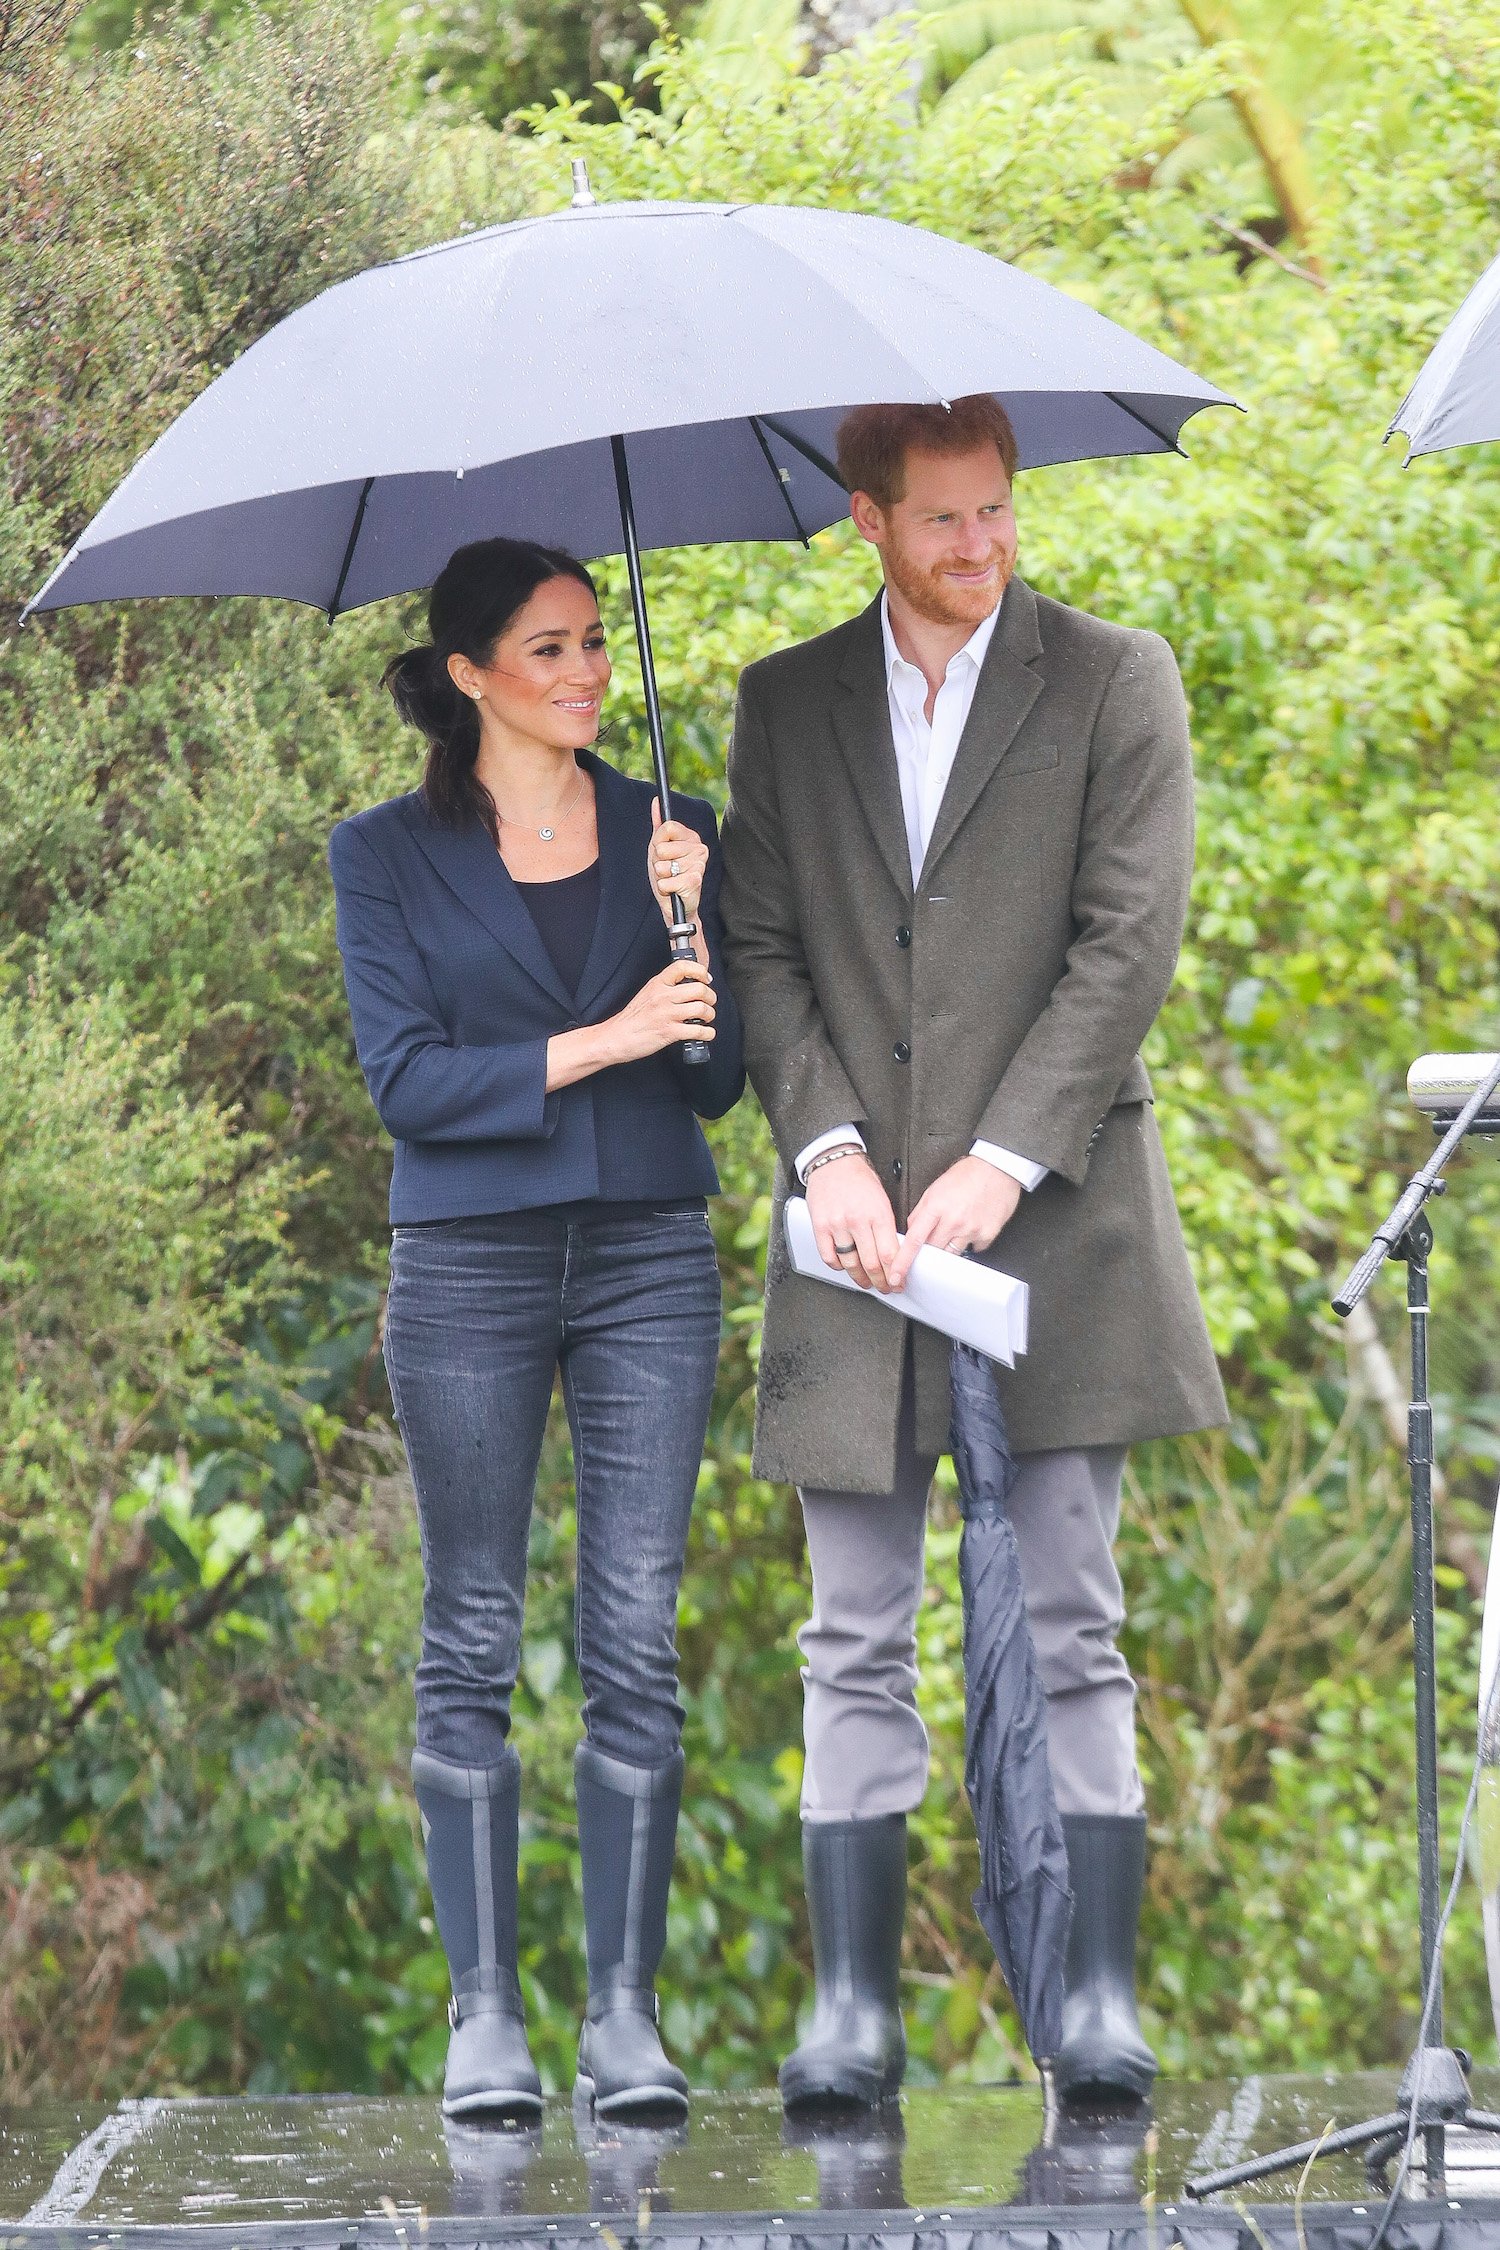 Meghan Markle and Prince Harry in New Zealand standing under an umbrella